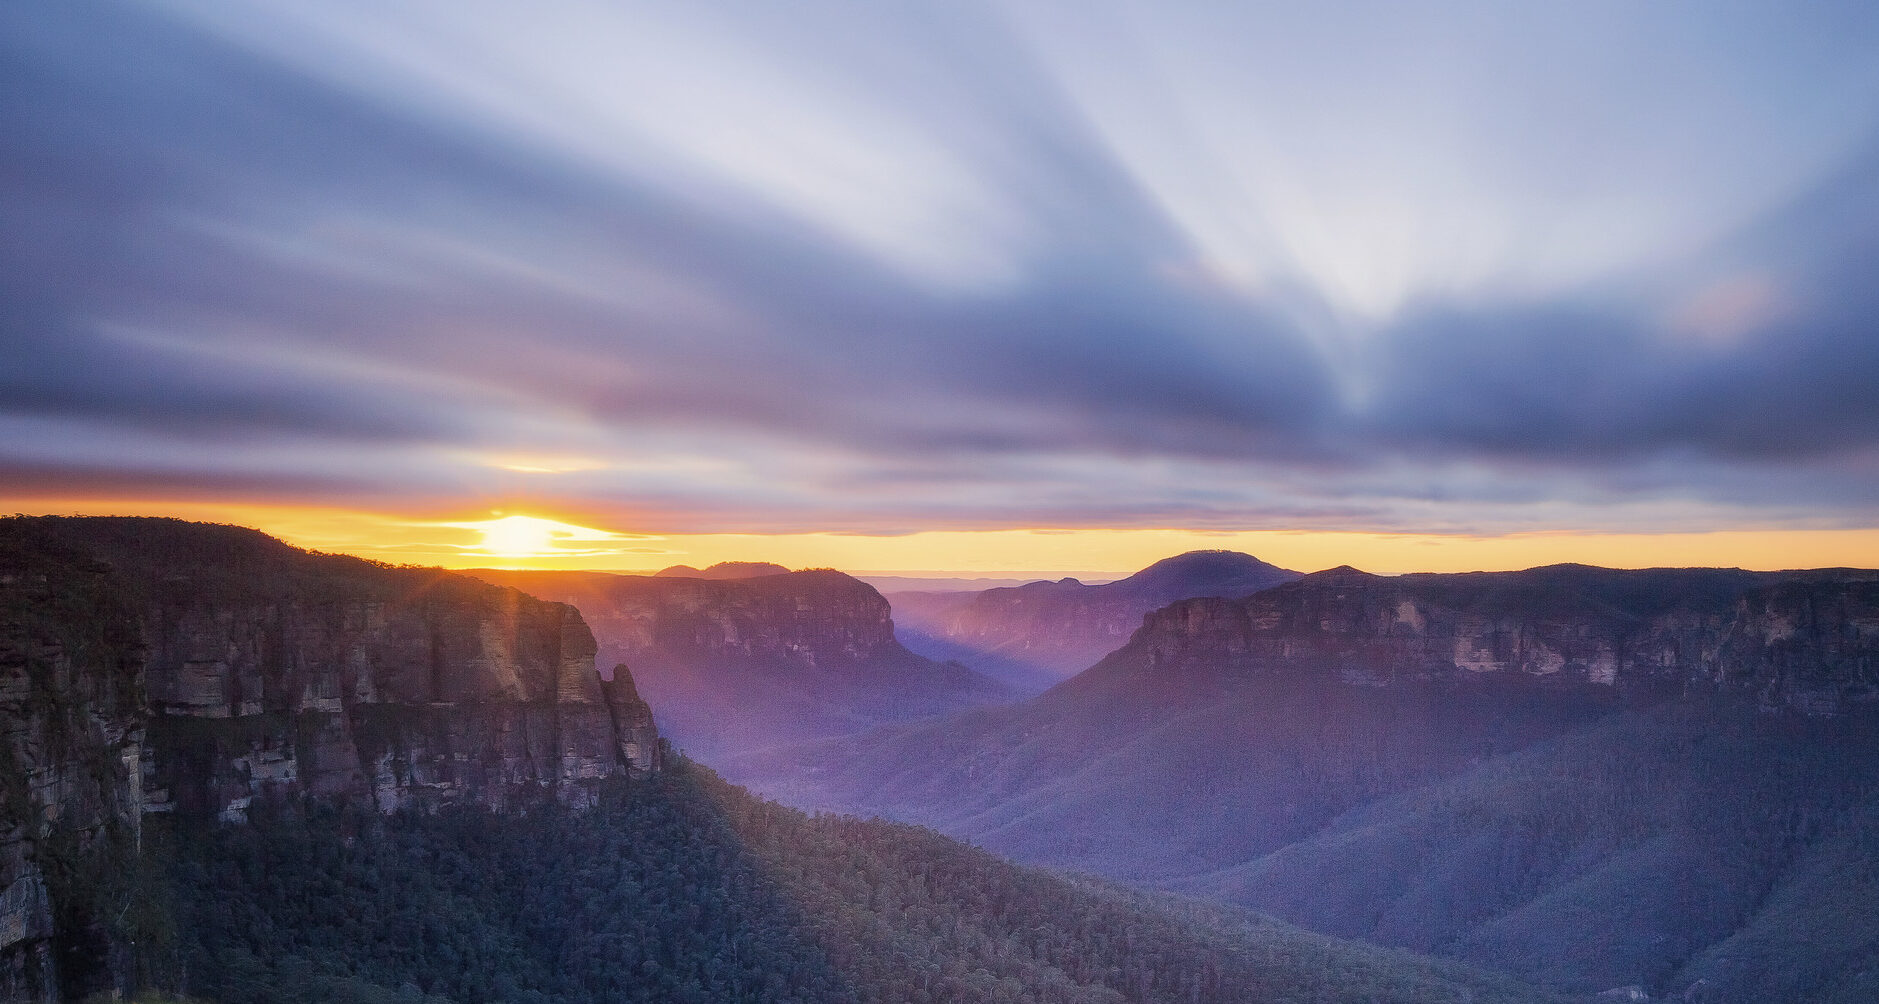 Sun setting over the Grose Valley in the Blue Mountains National Park.